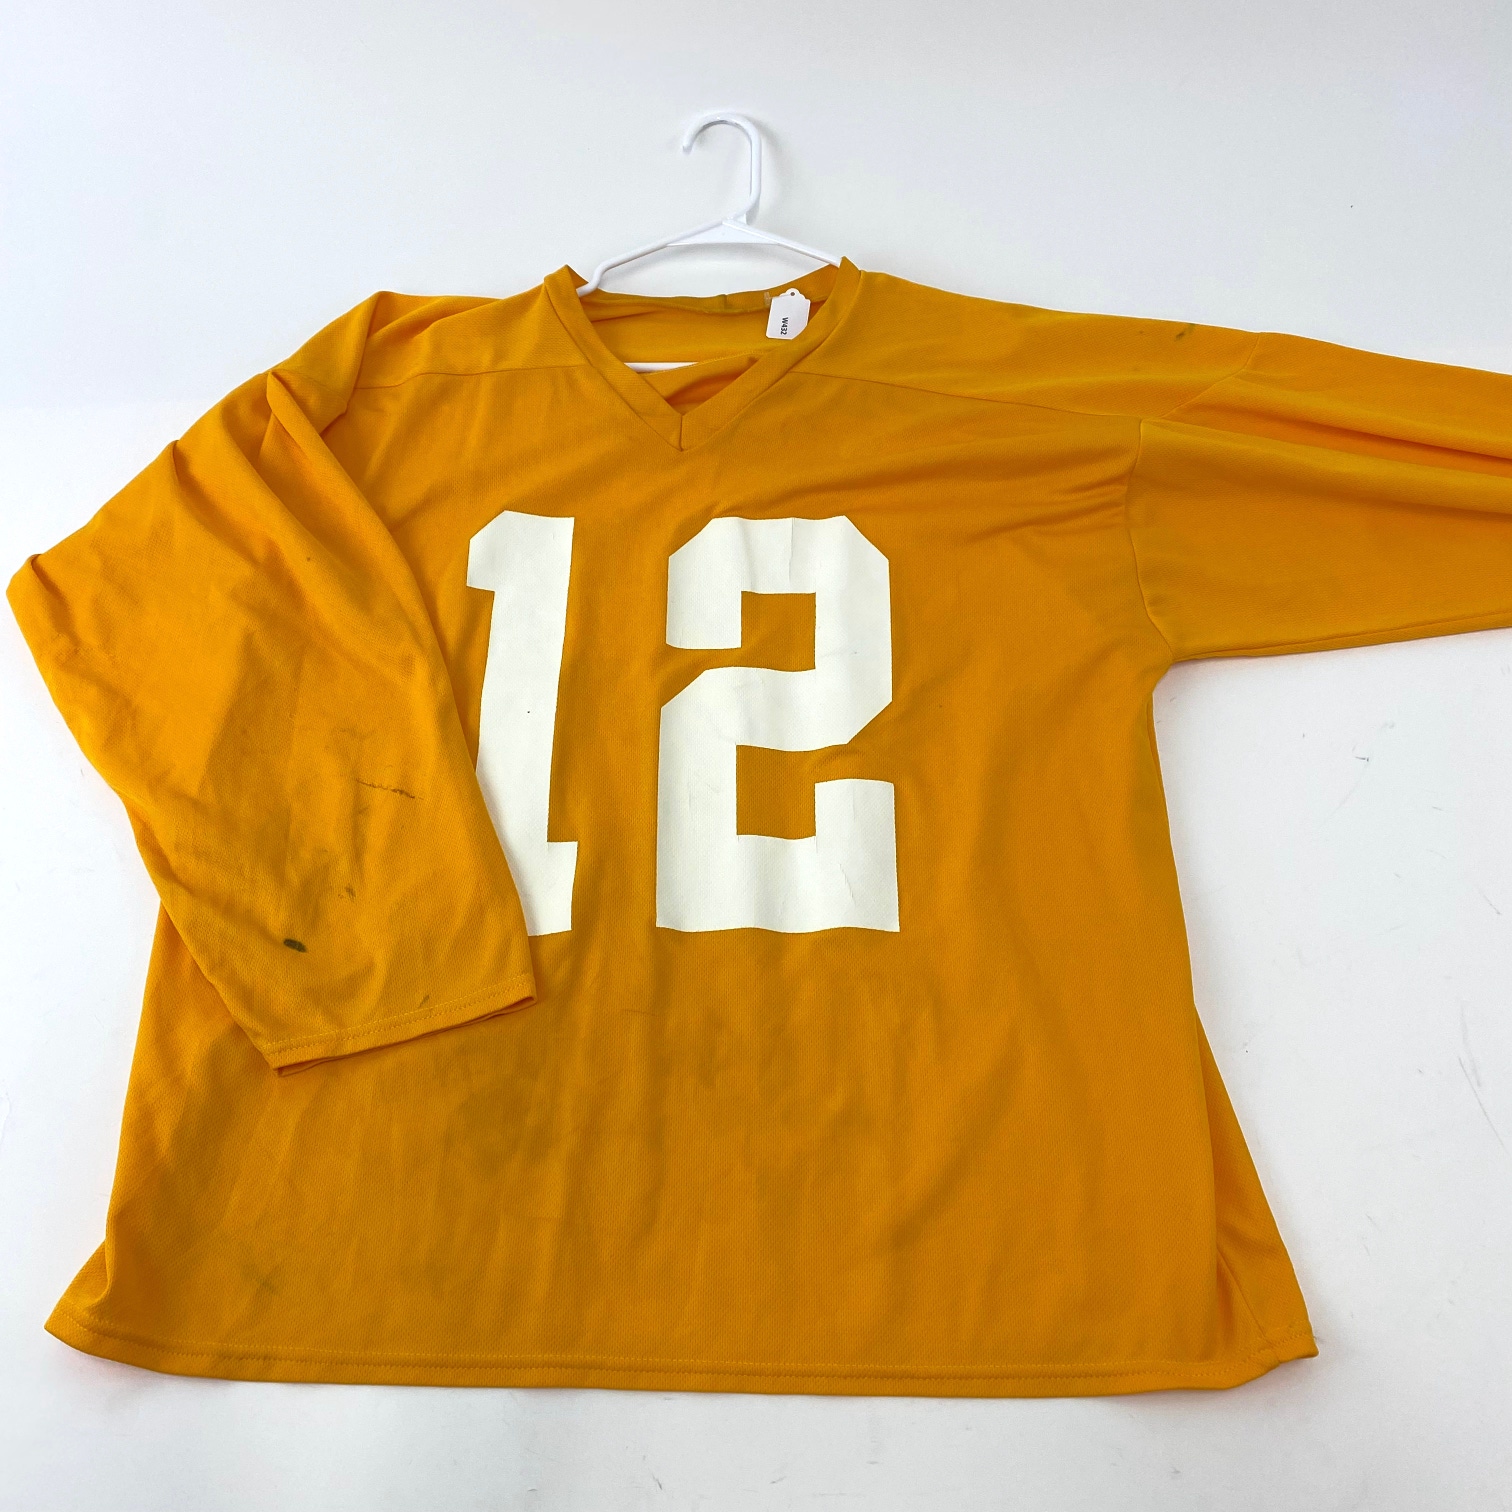 Used Yellow Practice JErsey | Adult XL | W432